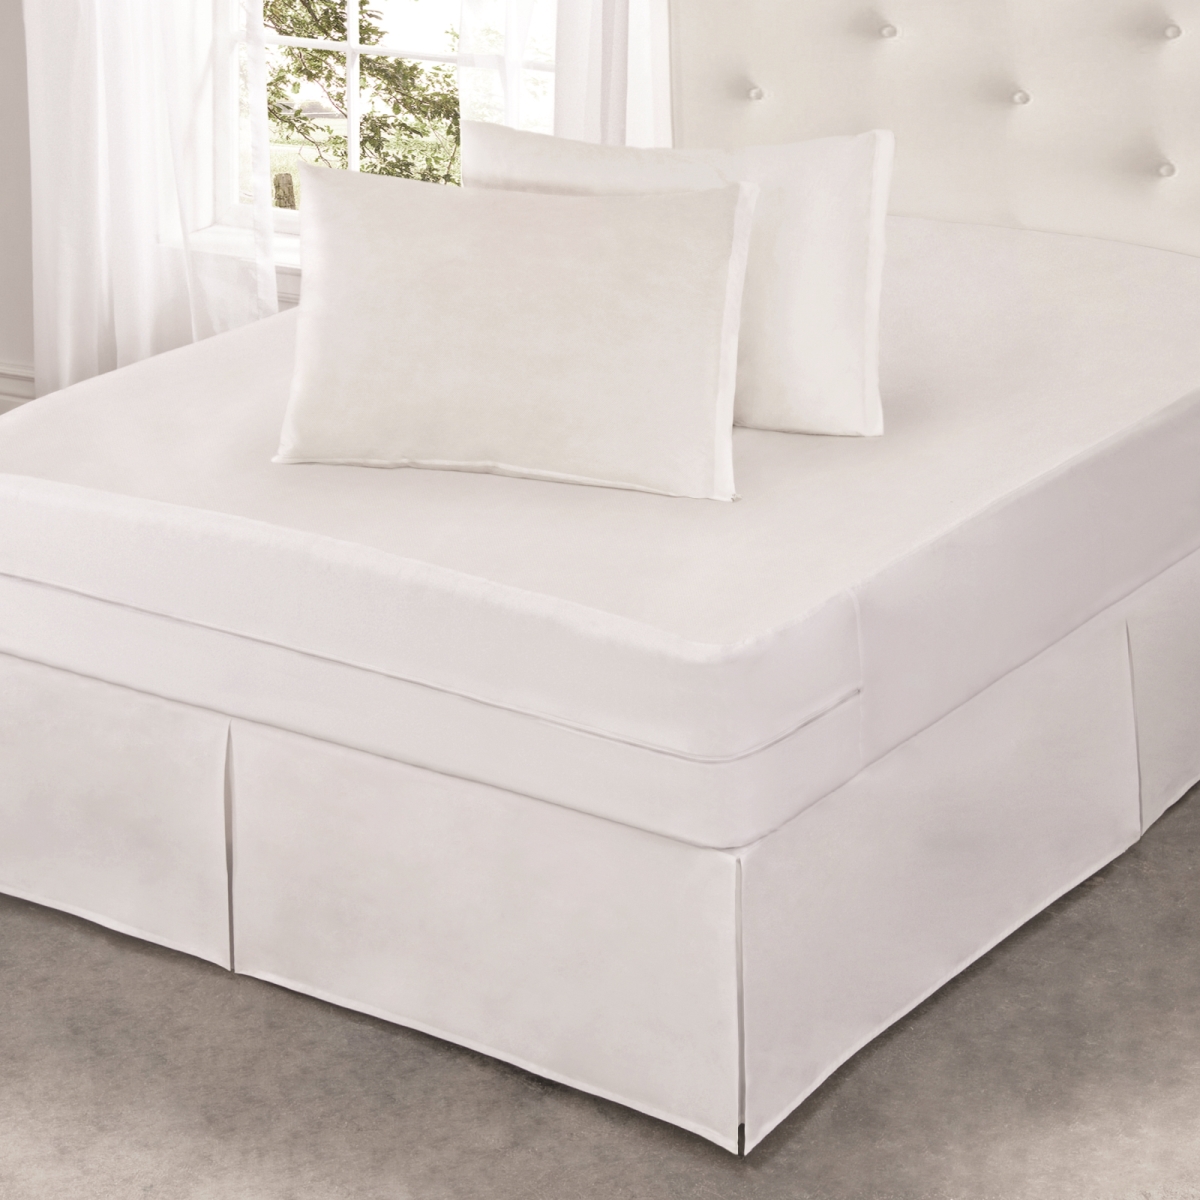 All166xxwhit01 Easy Care Mattress Protector With Bed Bug Blocker, White - Twin Size